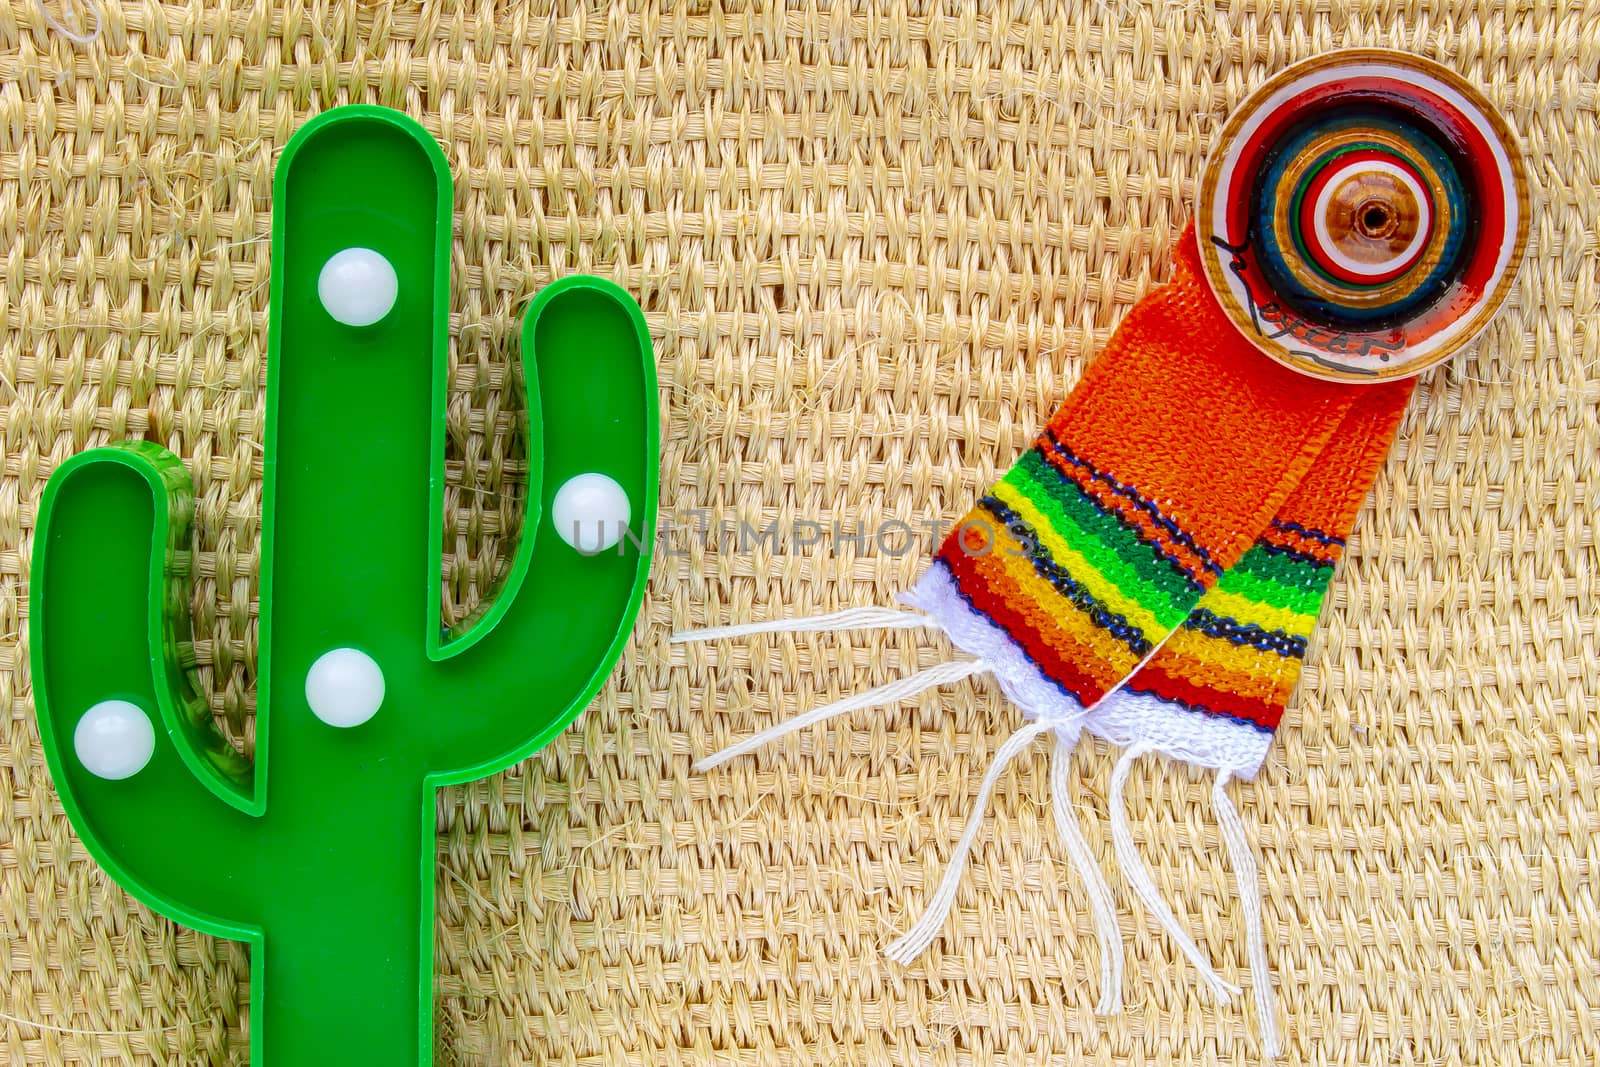 Cinco de Mayo background. A cactus and a sombrero and poncho on a straw rural bag background texture by oasisamuel